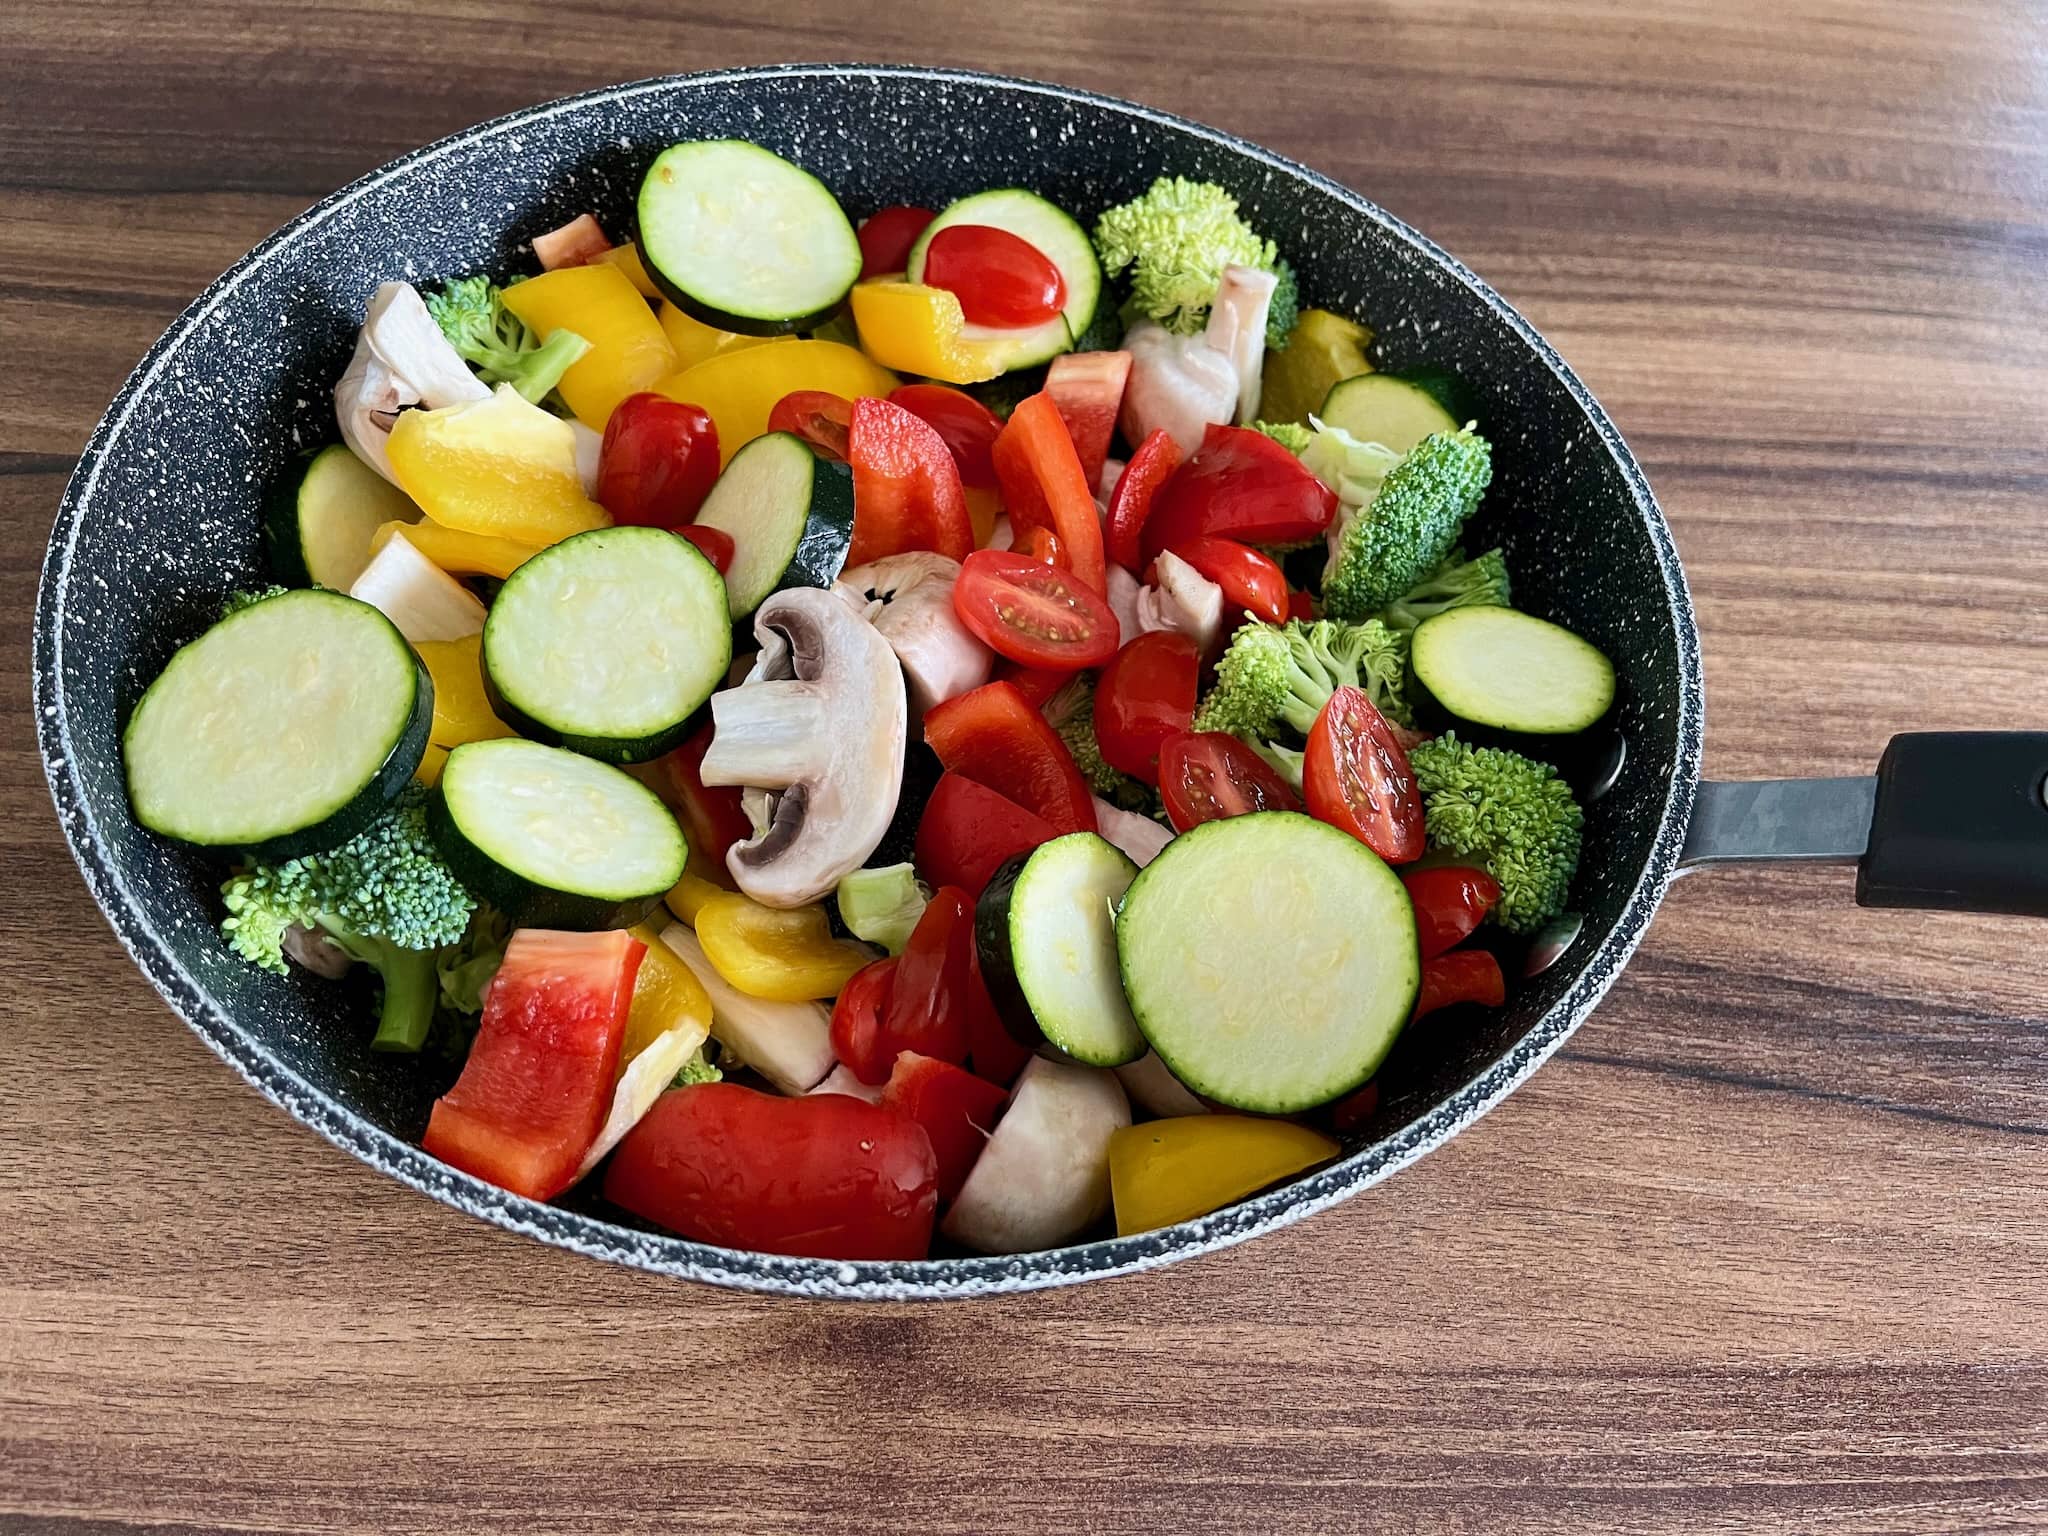 All vegetables in a large pan ready to make Stir Fry